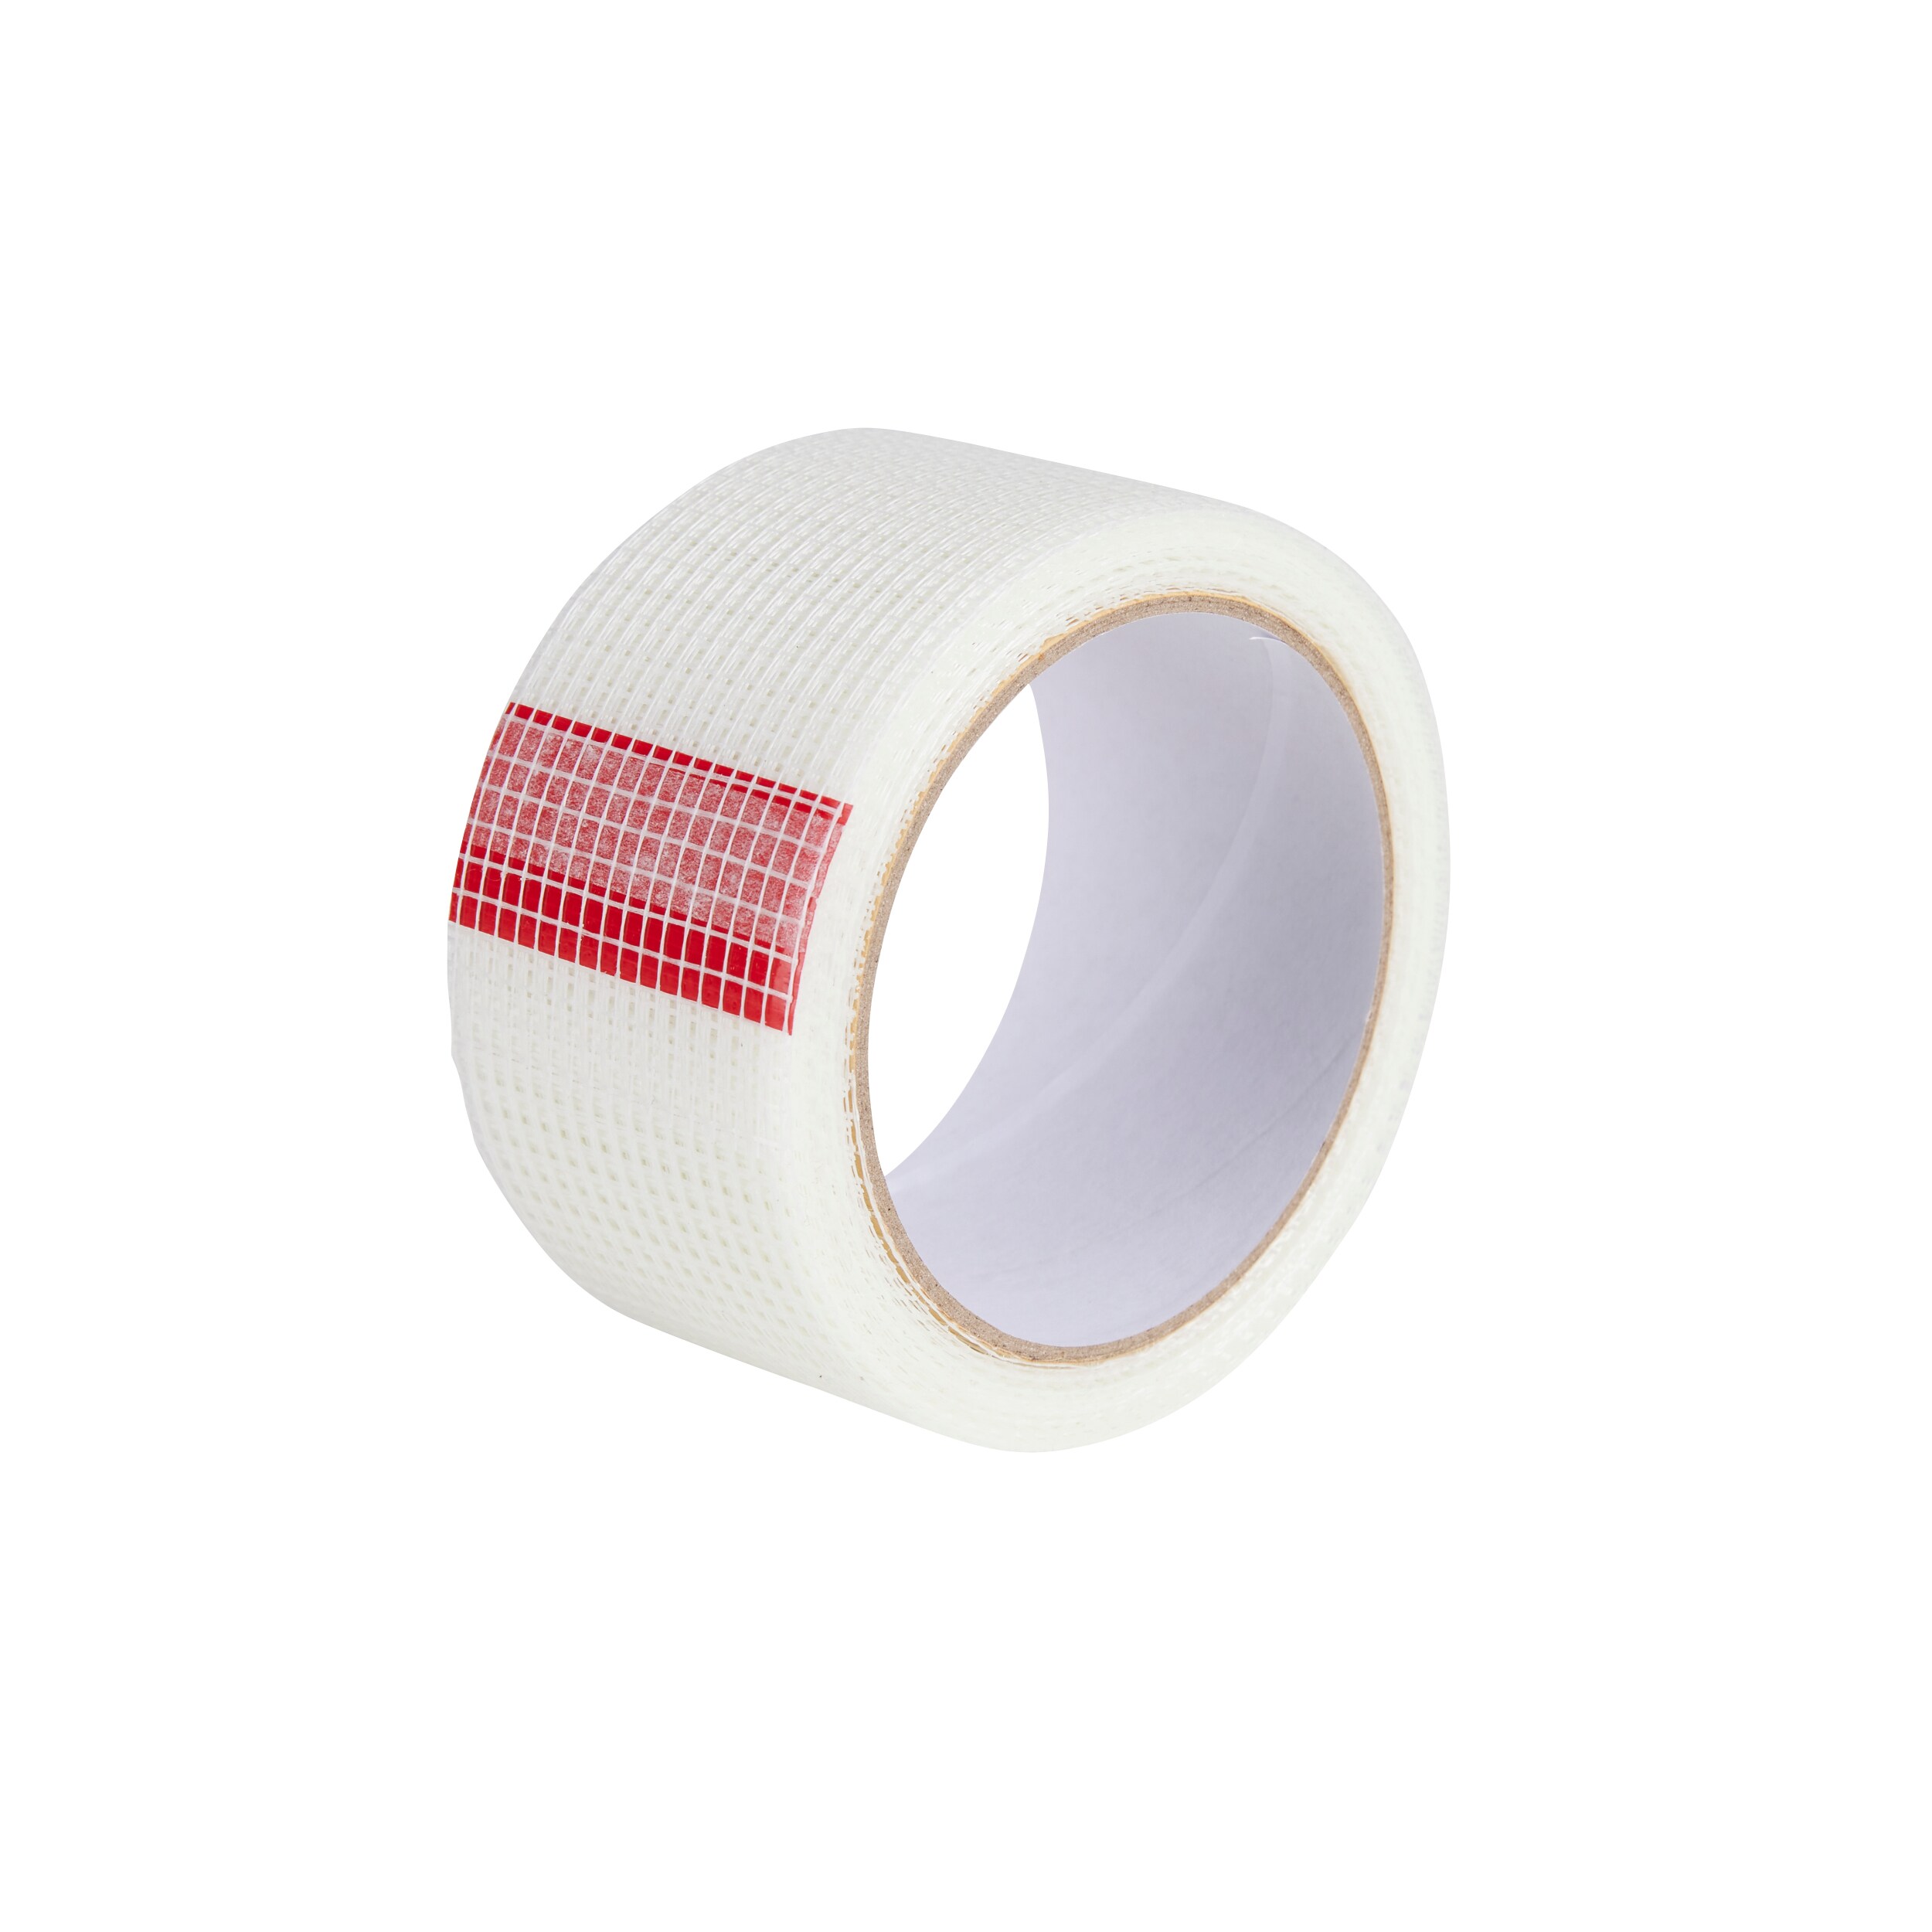 Marshalltown 2-in x 50-ft Mesh Construction Self-Adhesive Joint Tape